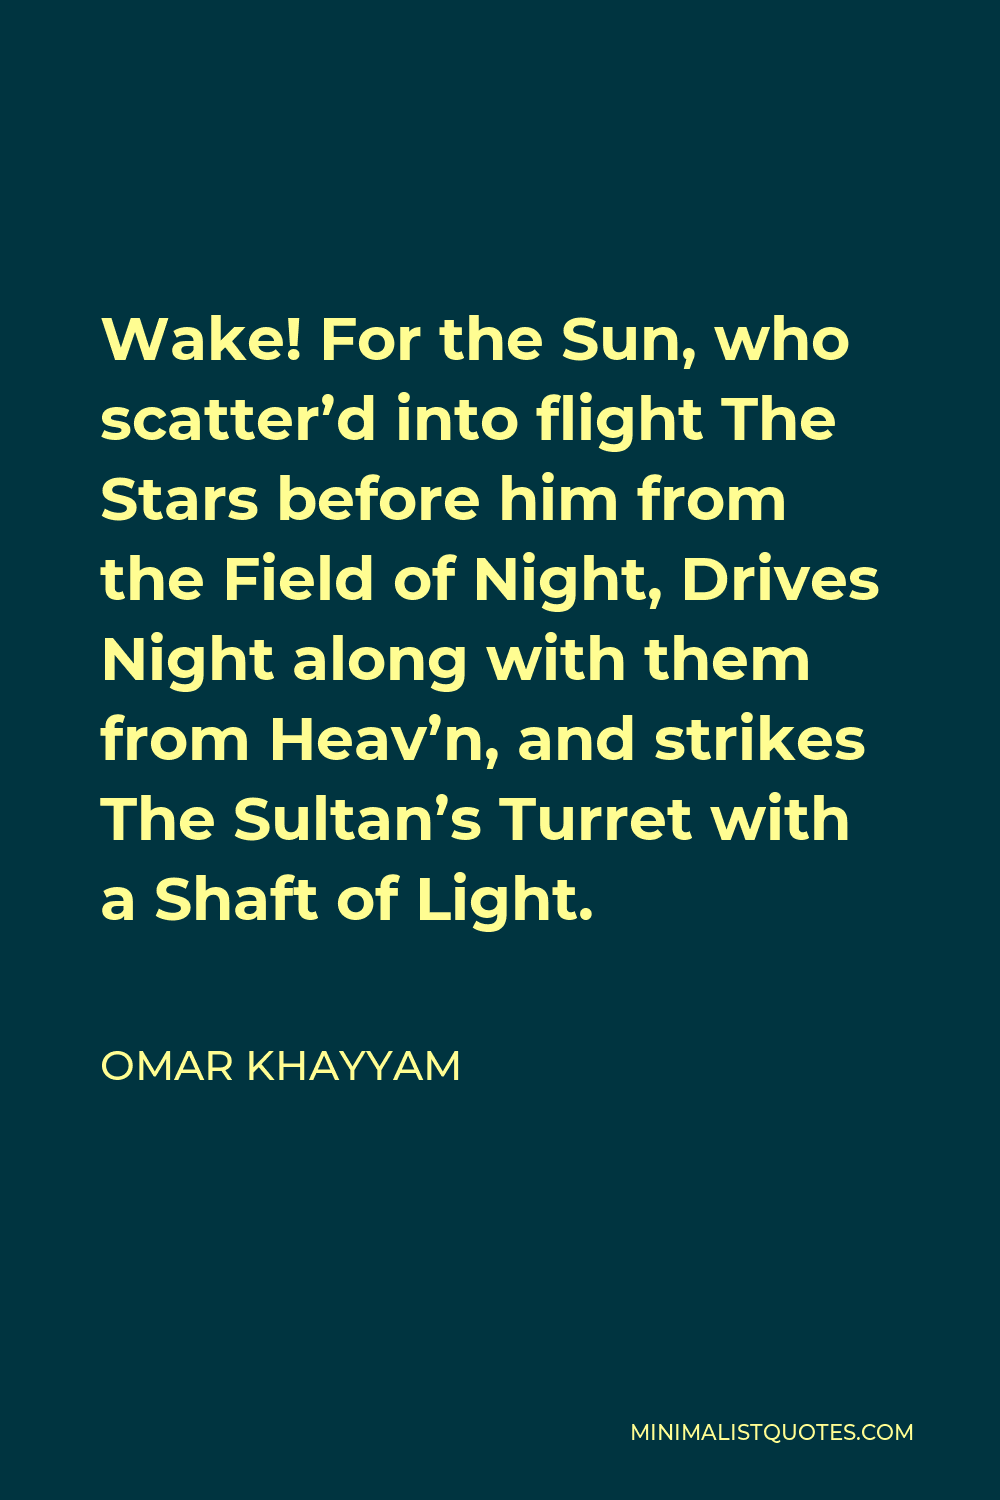 Omar Khayyam Quote - Wake! For the Sun, who scatter’d into flight The Stars before him from the Field of Night, Drives Night along with them from Heav’n, and strikes The Sultan’s Turret with a Shaft of Light.